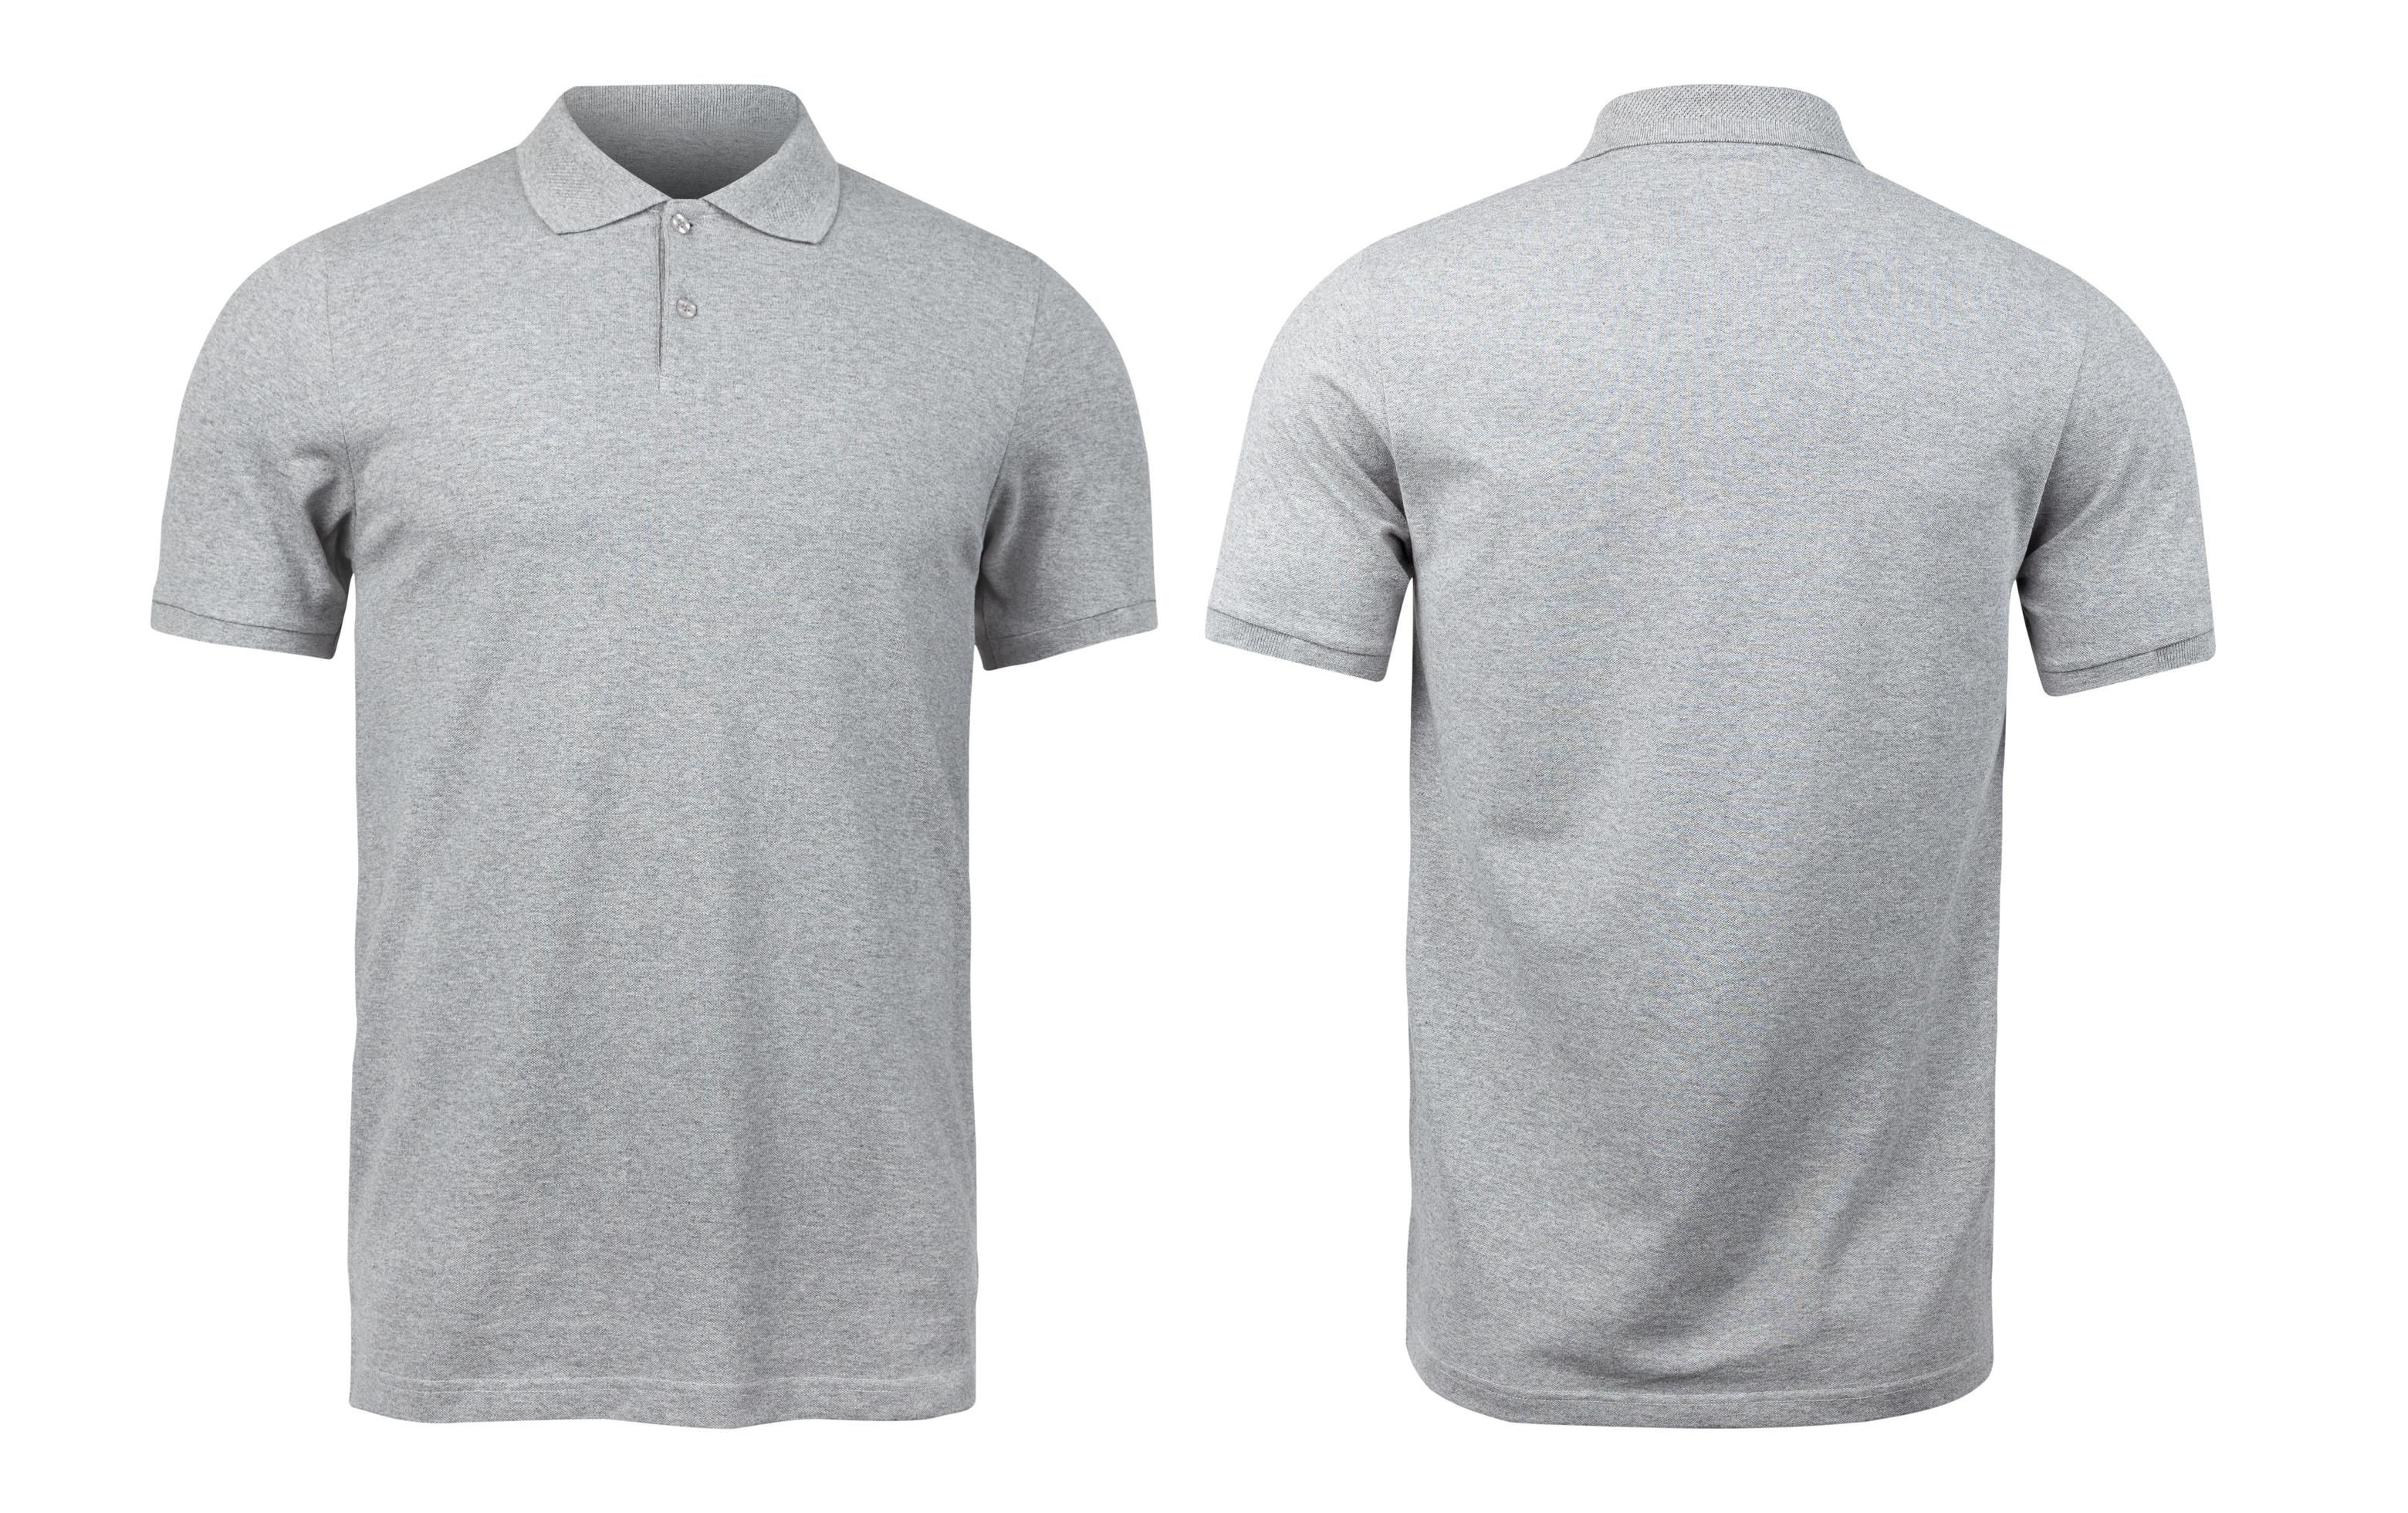 Grey polo shirts mockup front and back used as design template